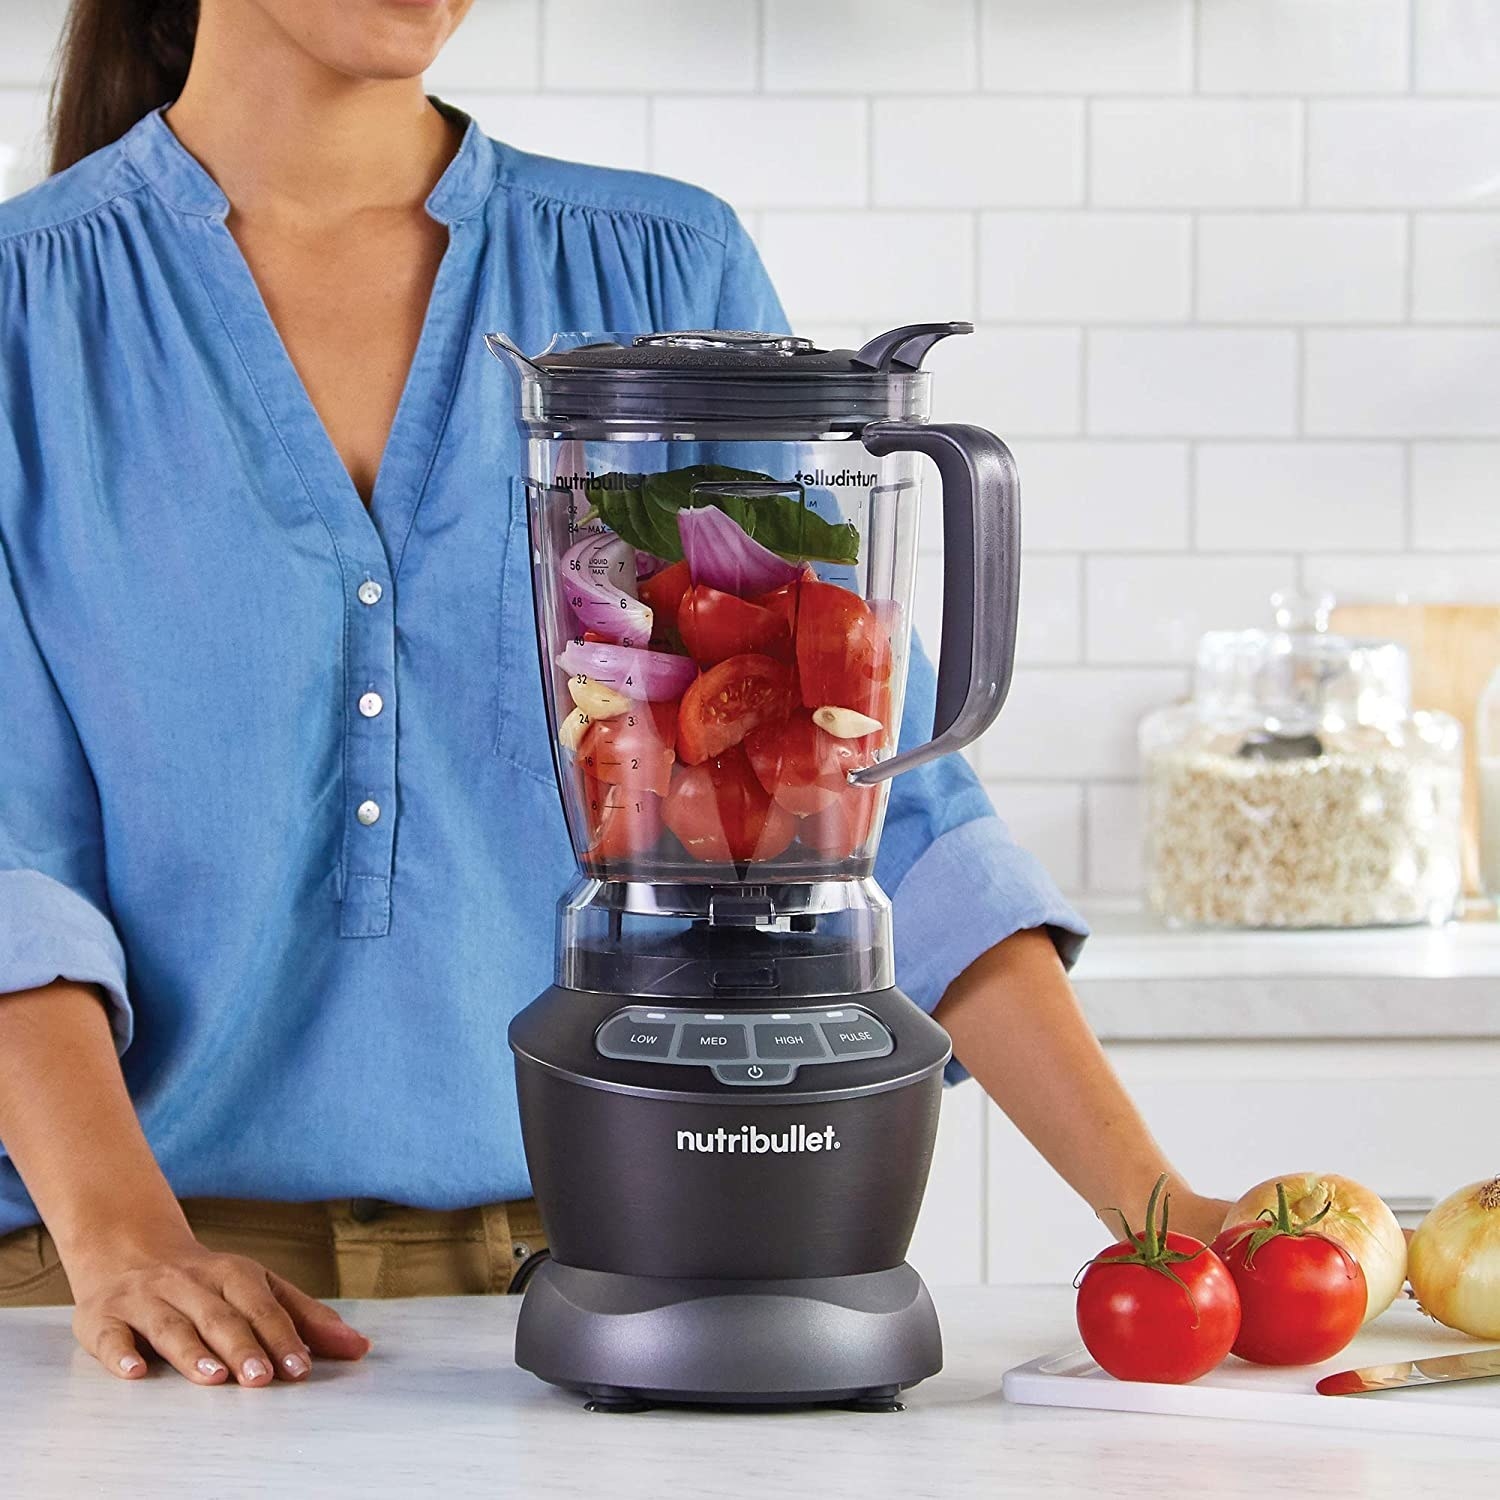 A person standing behind a blender filled with veggies